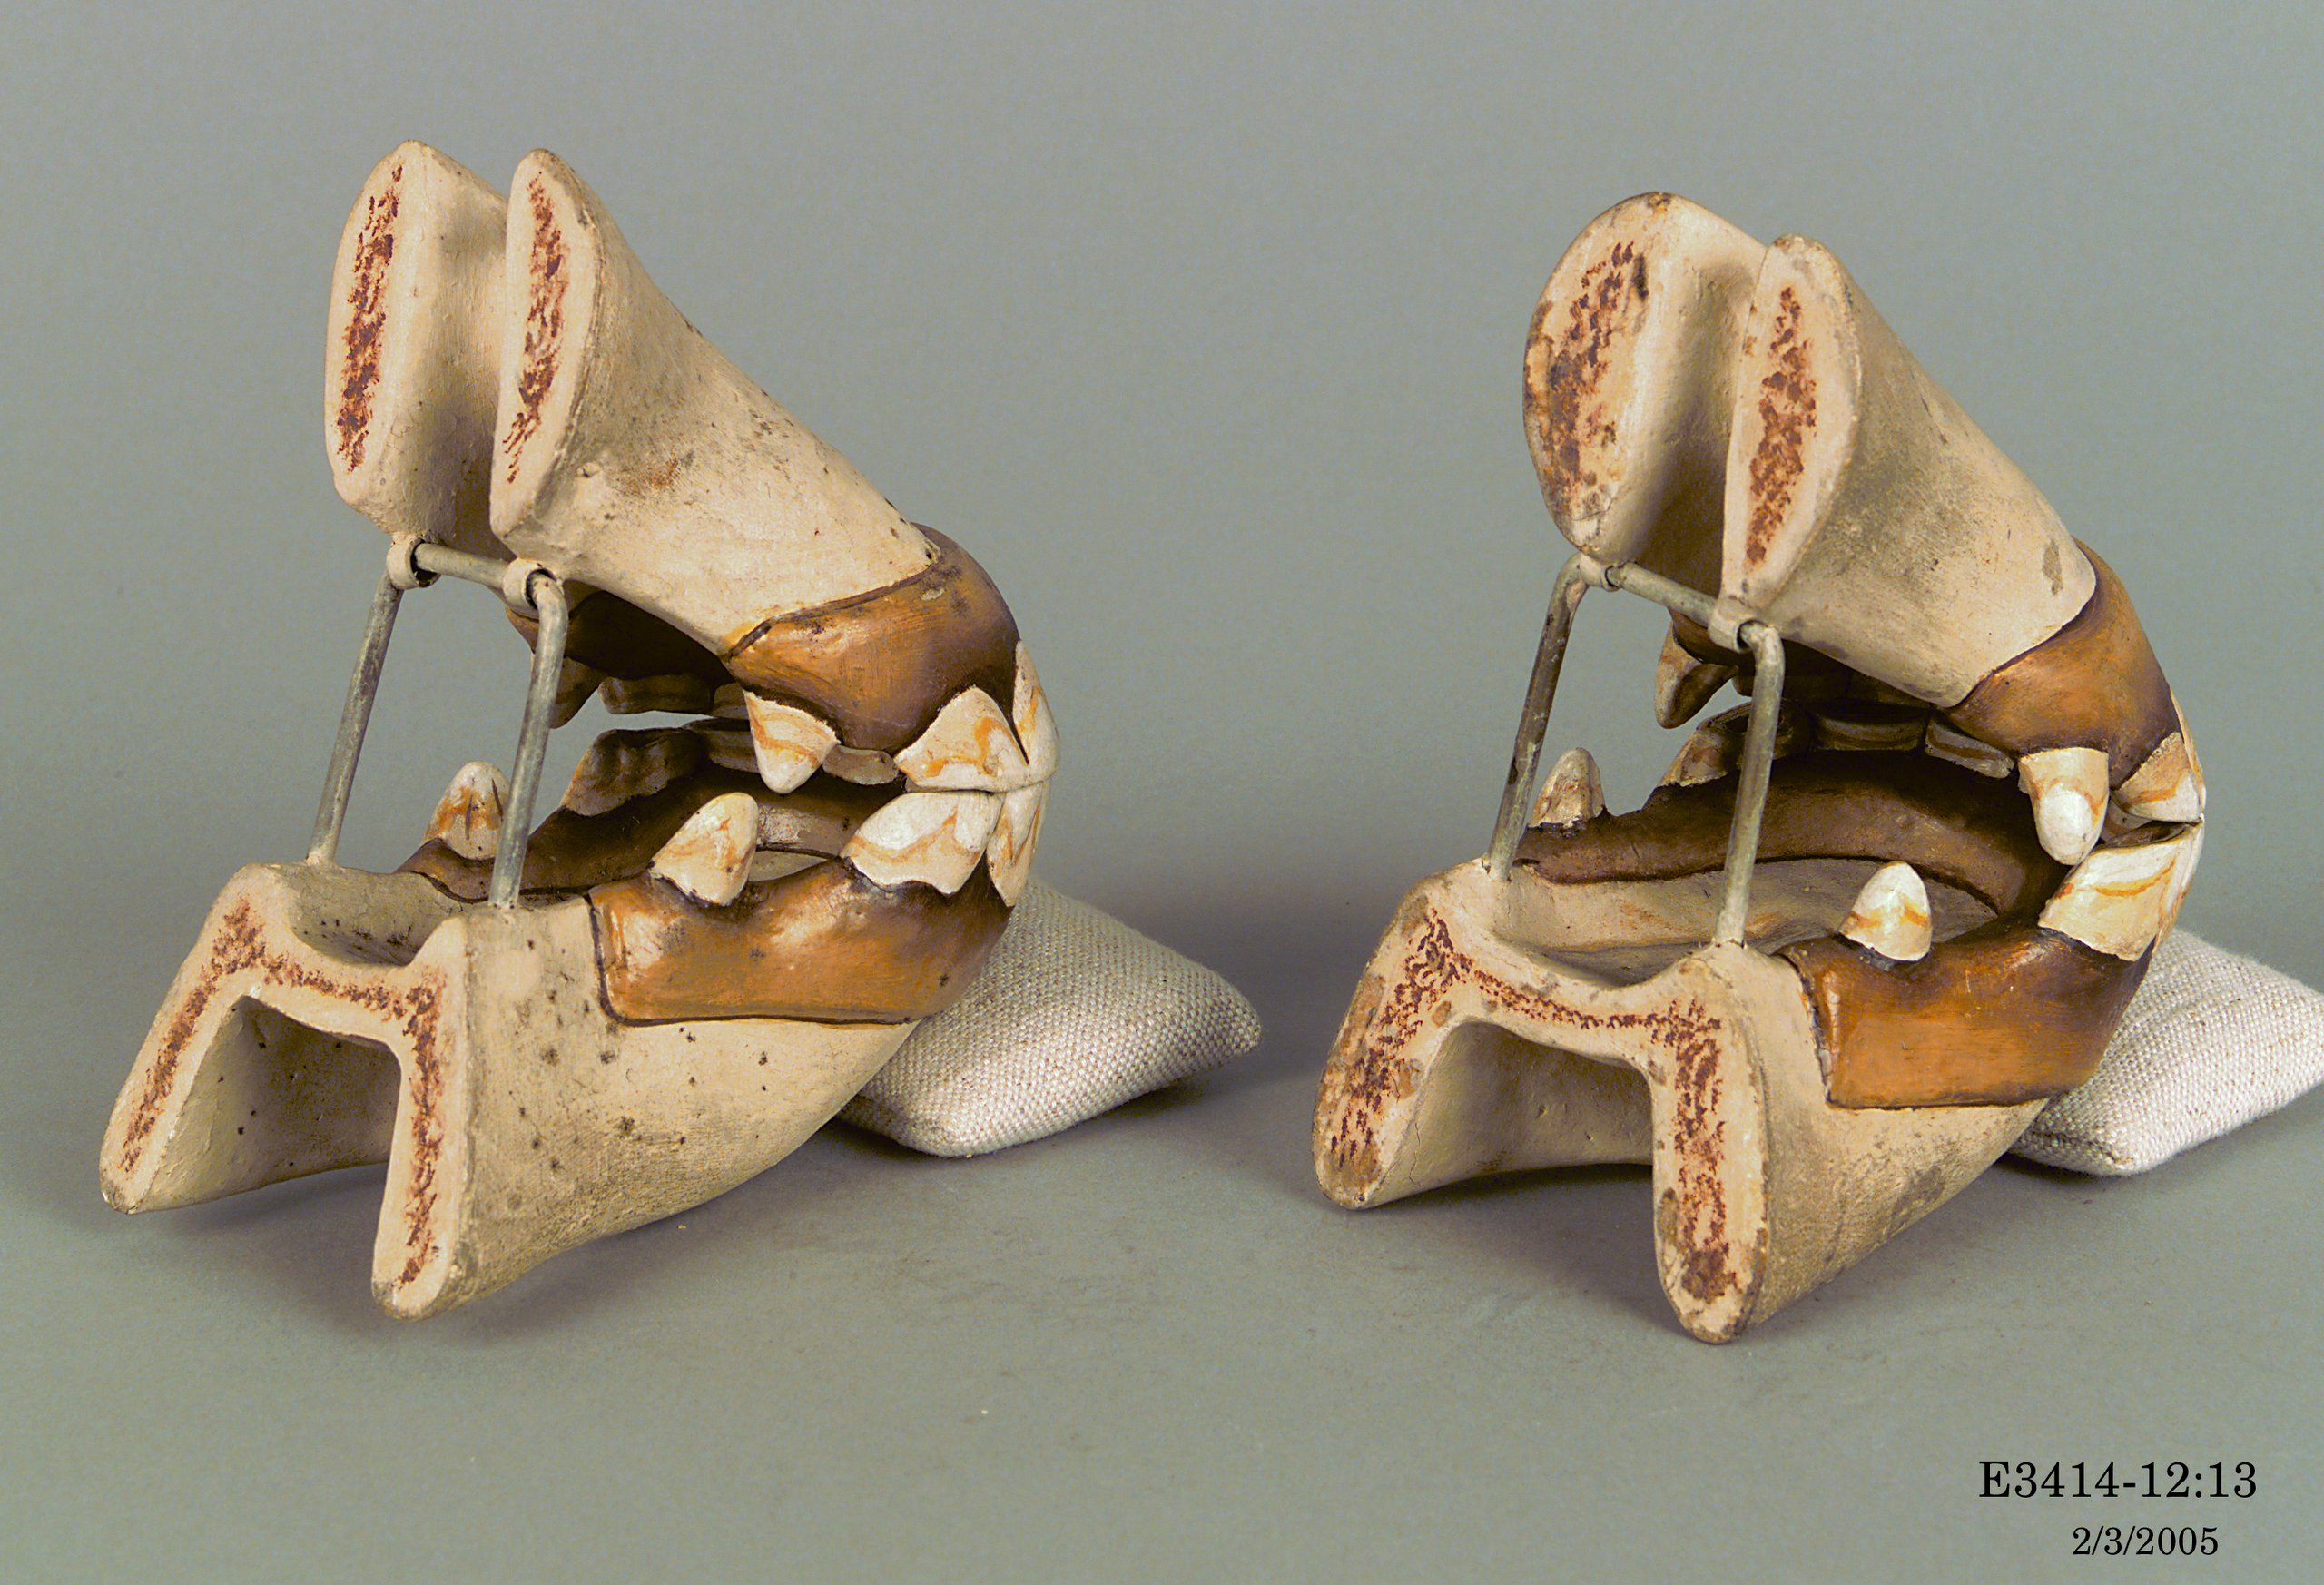 Collection of plaster casts of horse teeth ranging from birth to old age